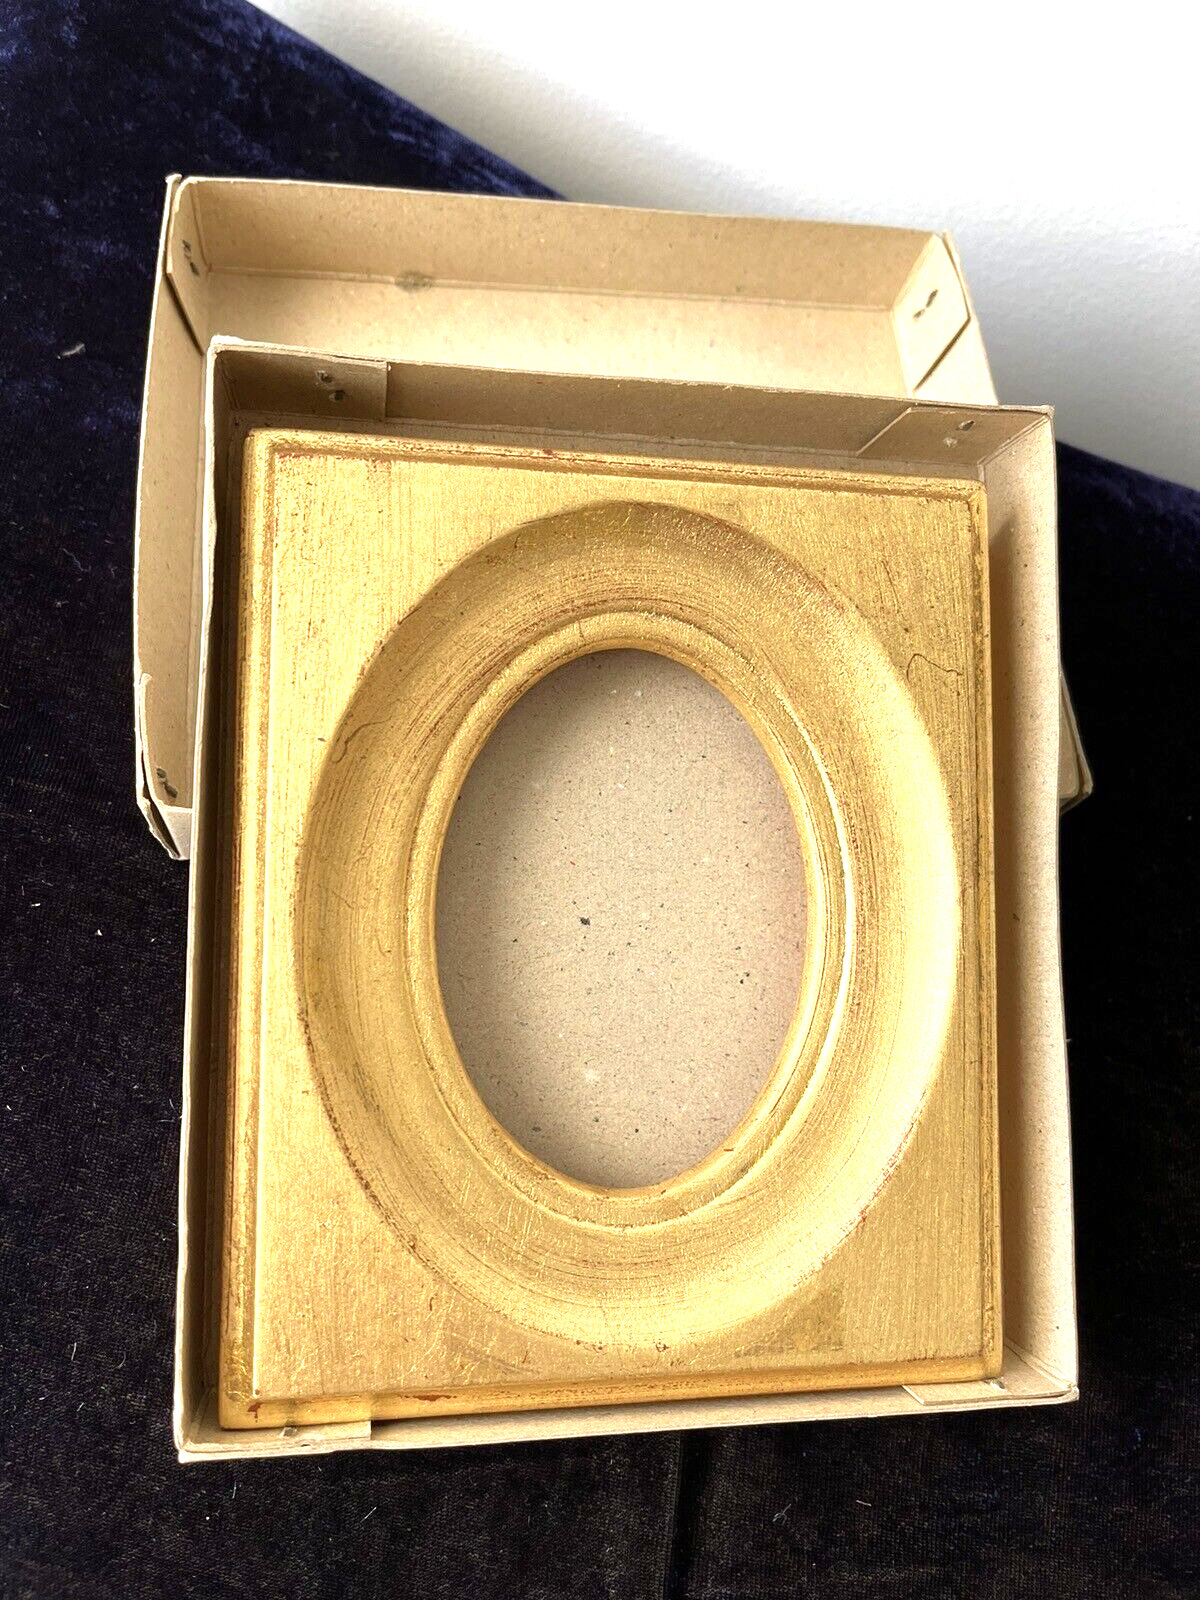 VTG  GORGEOUS GOLD FRAME WITH OVAL OPENING, OSS, ORIG BOX. GOLD PAINTED WOOD,